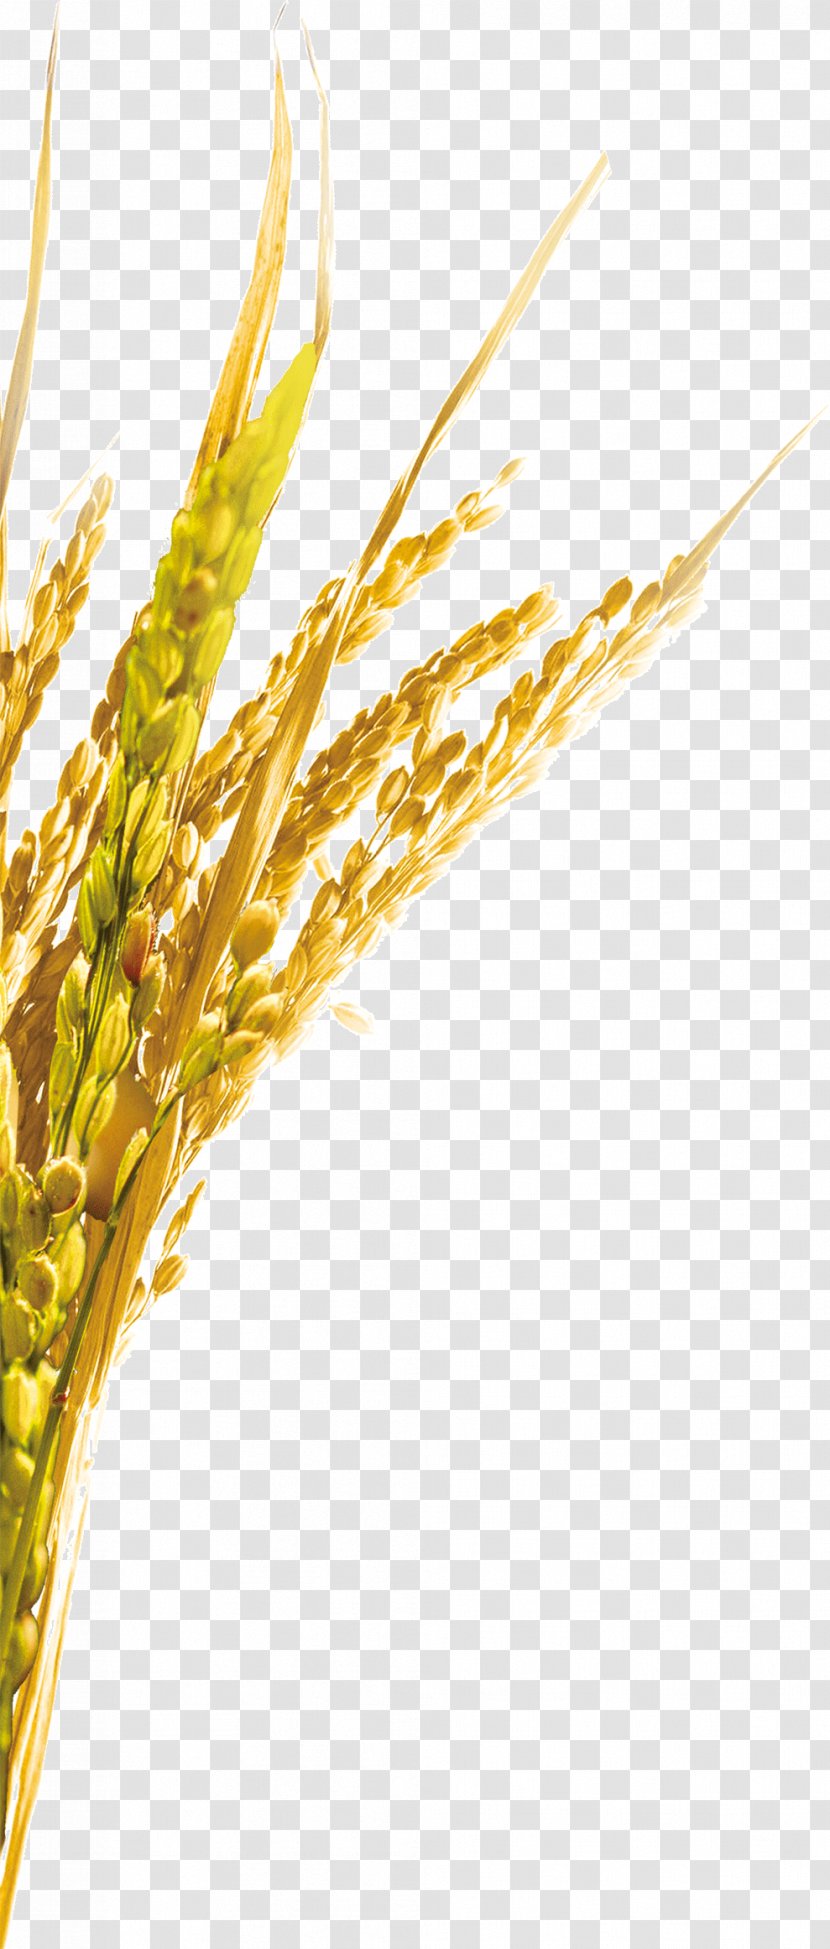 Emmer Rice Oat - Wheat Transparent PNG